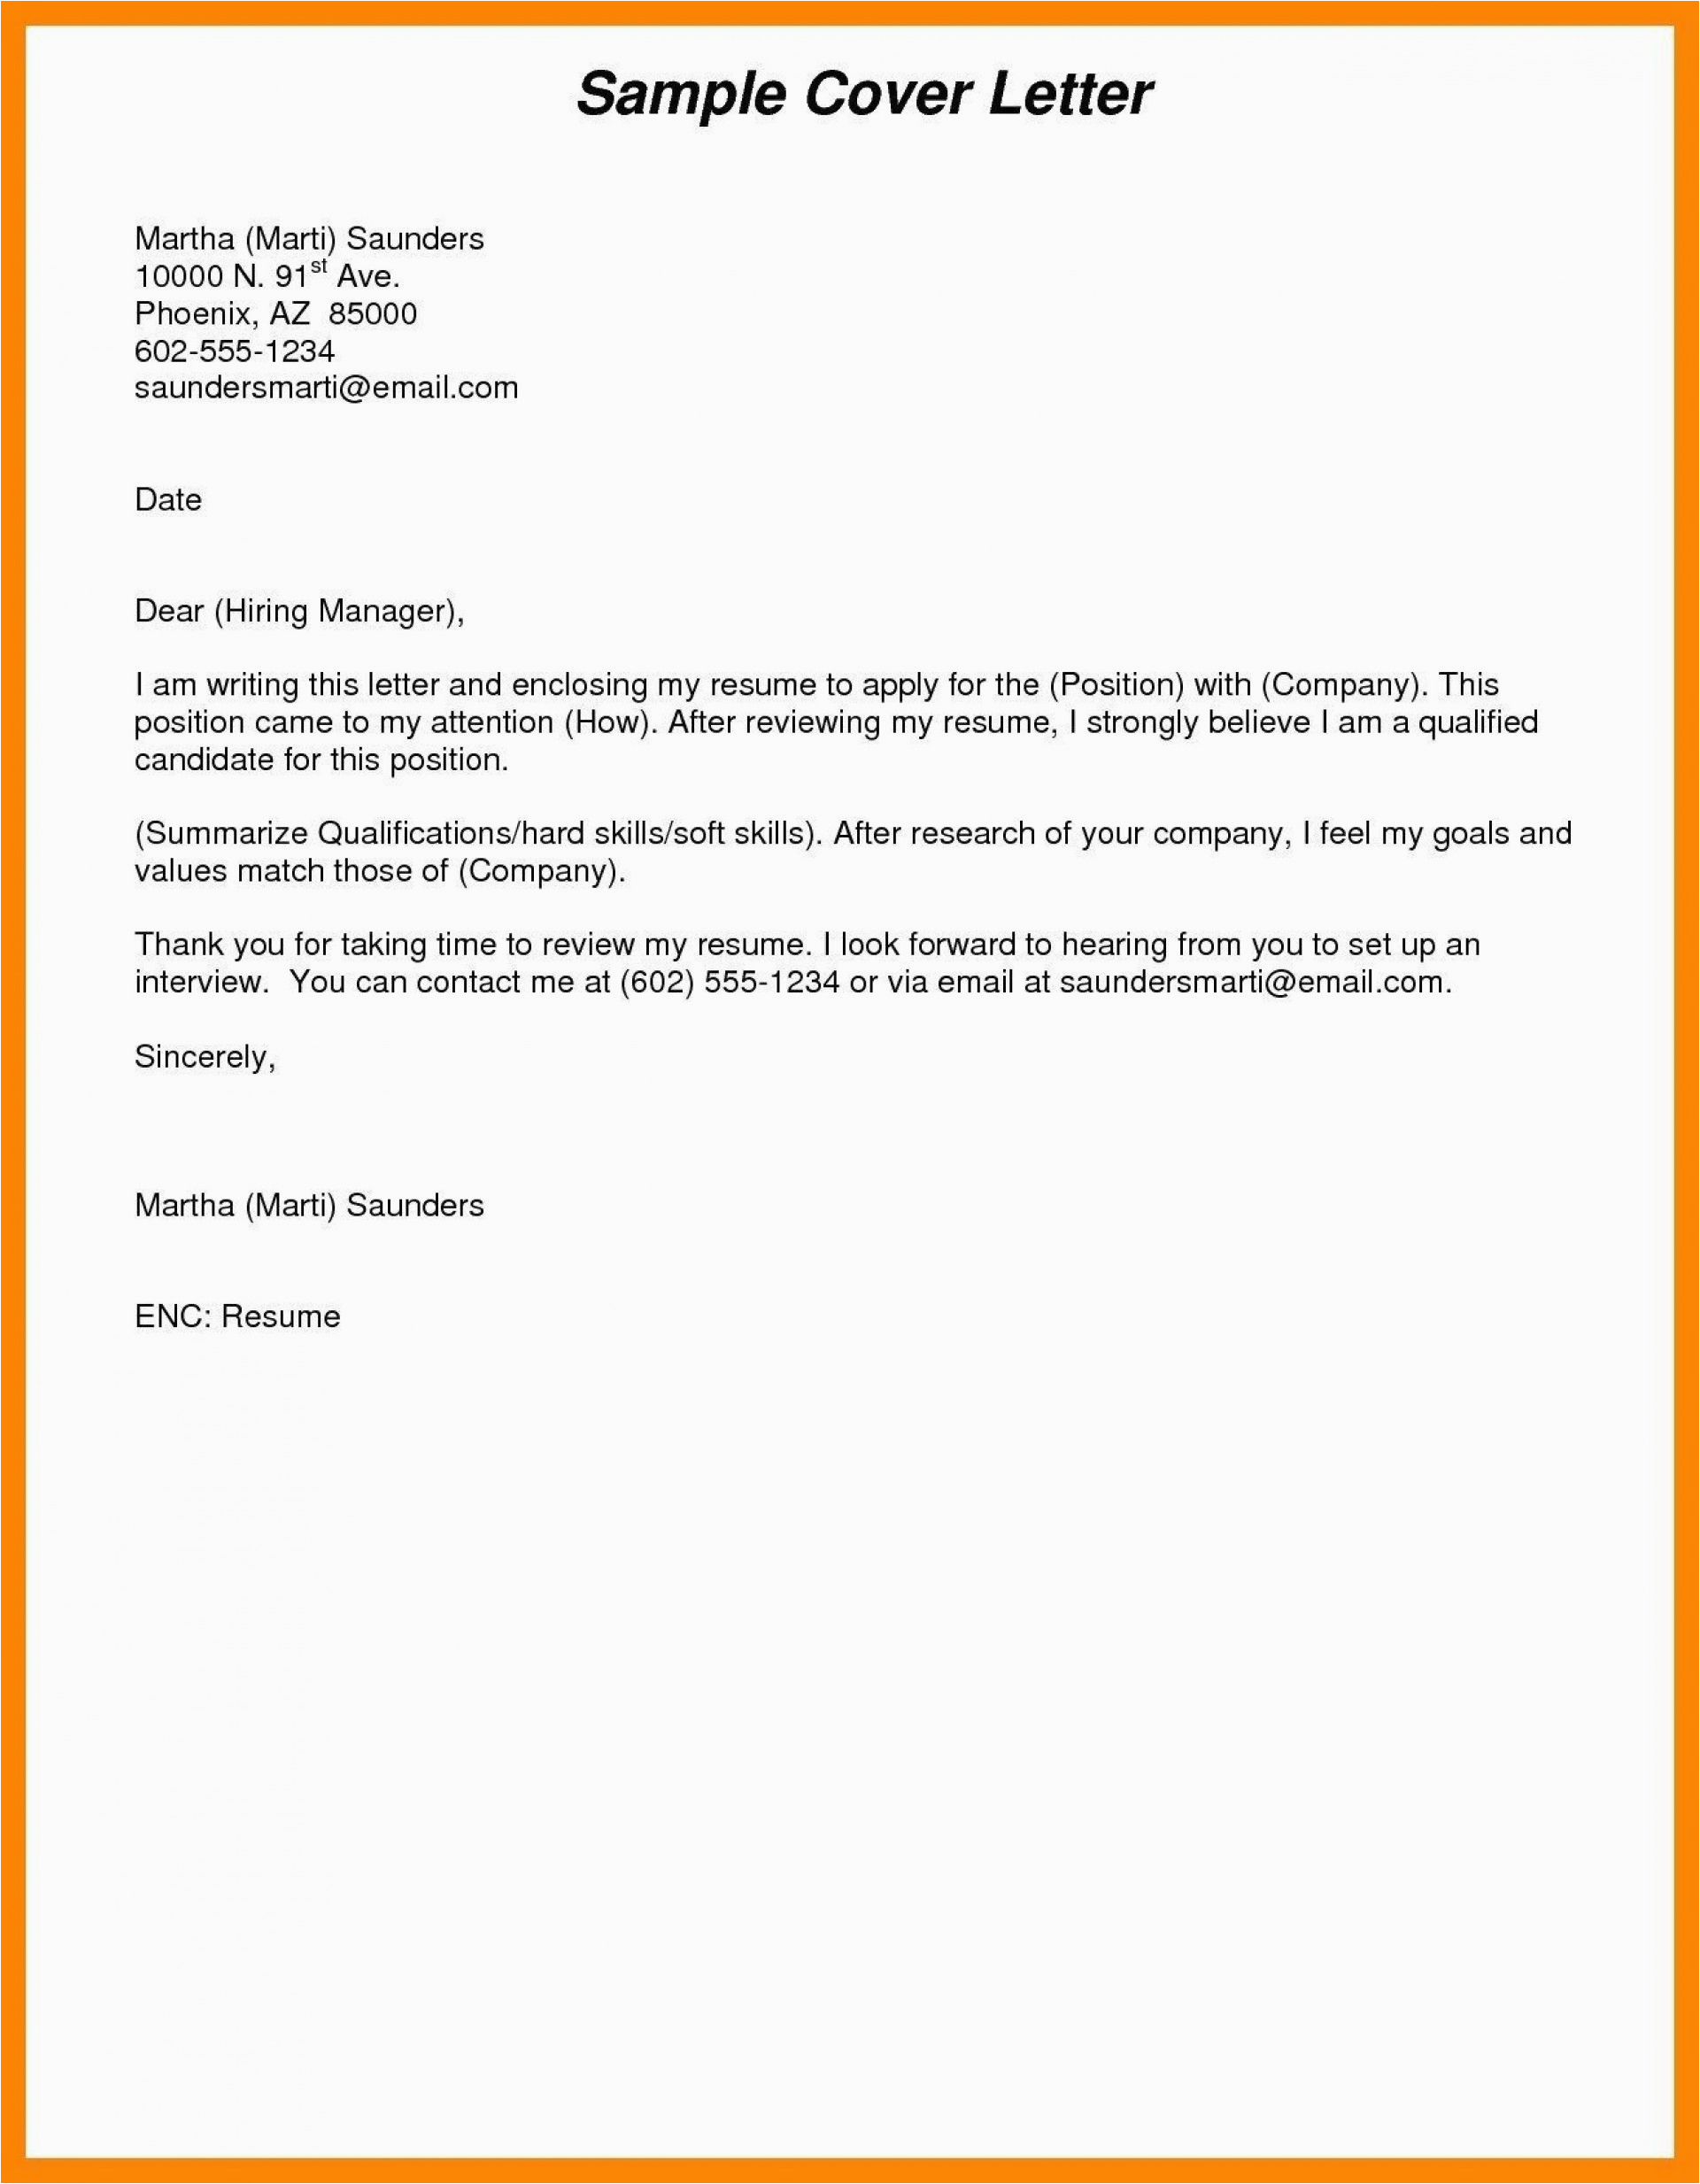 Cover Letter Sample for Sending Resume Email to Send Resume and Cover Letter for Your Needs